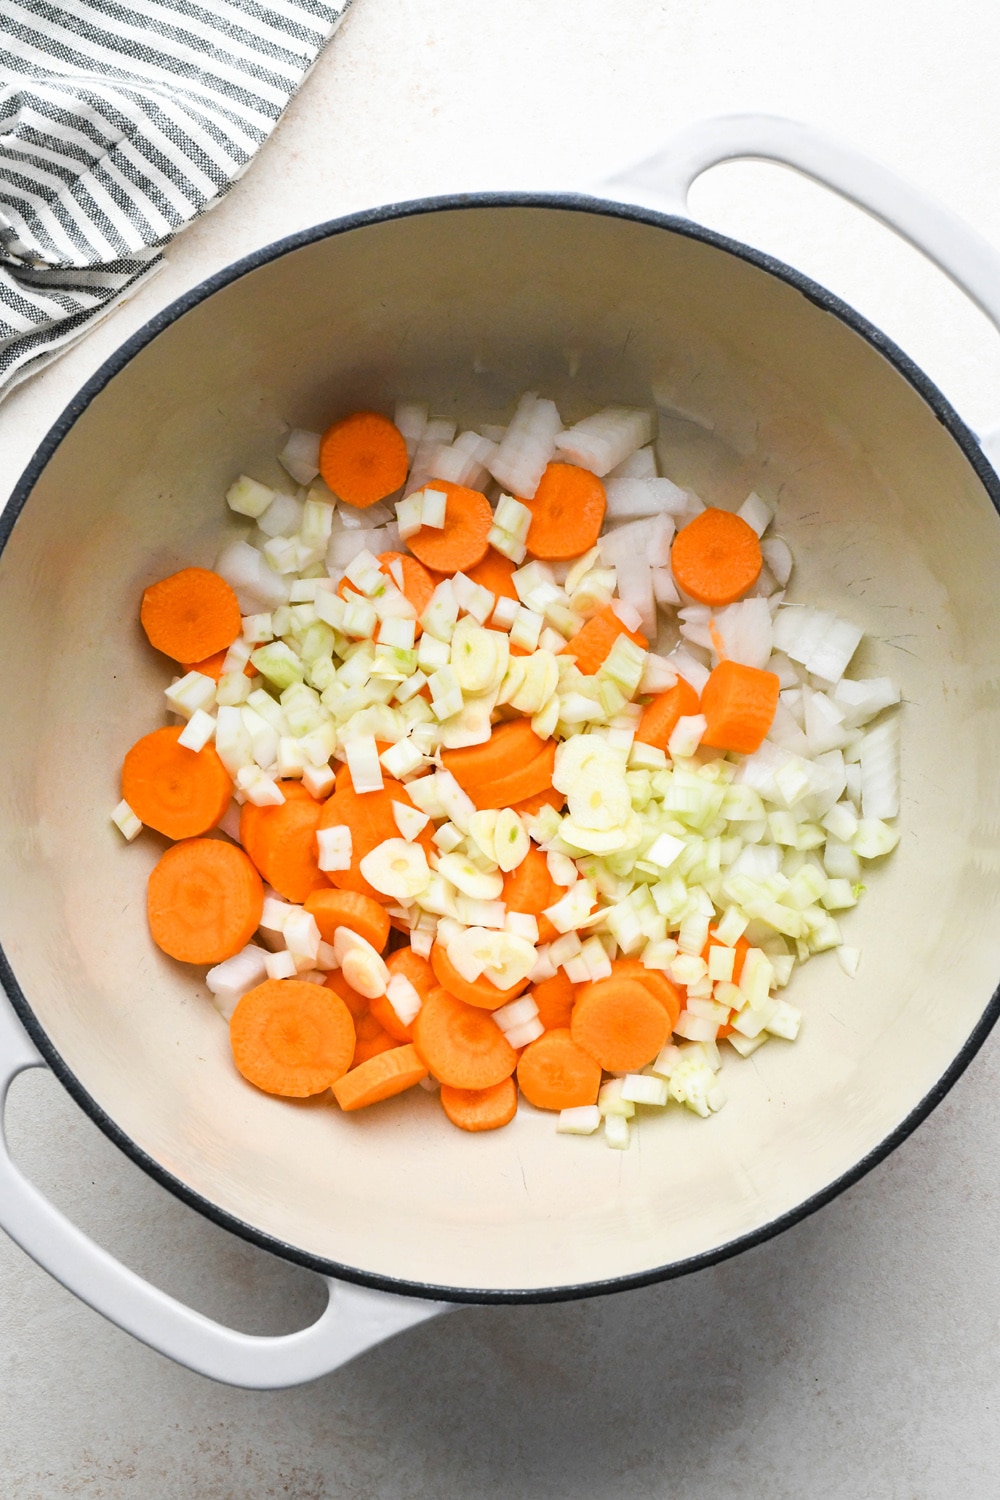 How to make Dairy Free Pumpkin Carrot Soup: Onions, carrots, and fennel in soup pot with olive oil before sautéing.